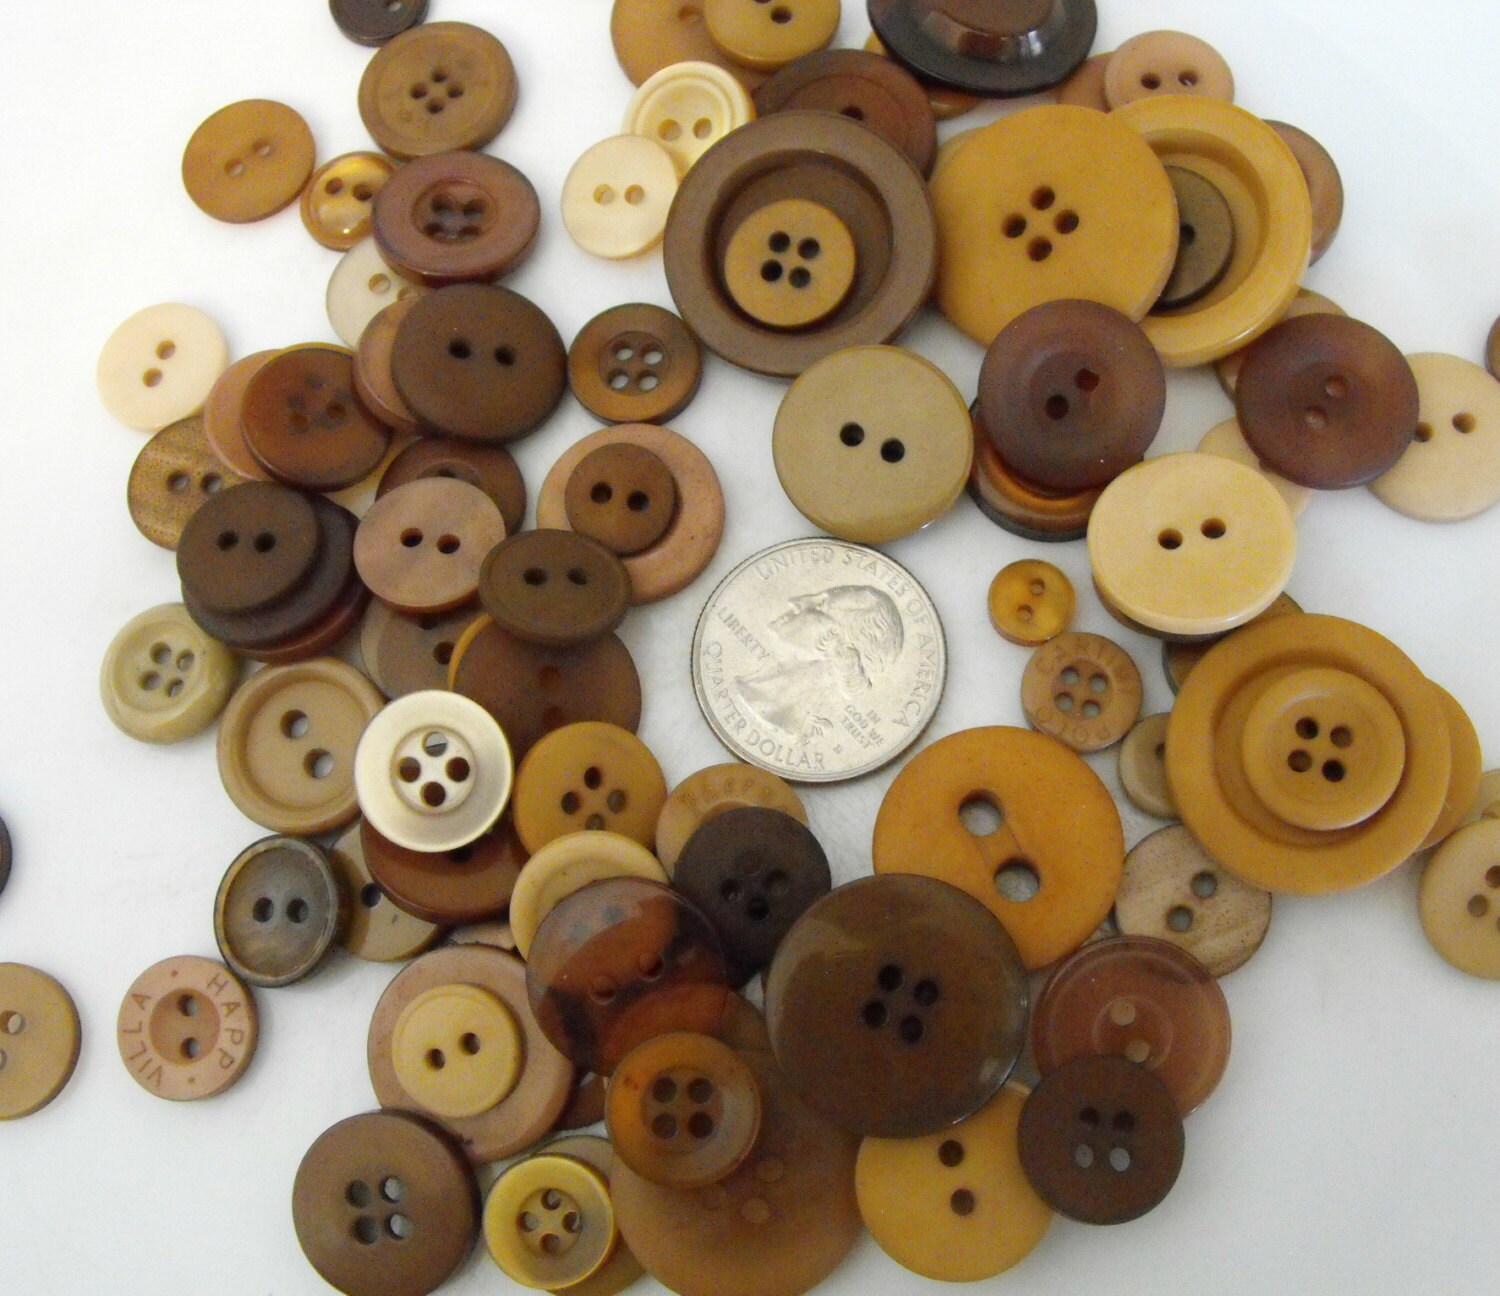 New 100 bulk buttons 1/2 inch size 4 colors to choose  cream/black/gray/browns